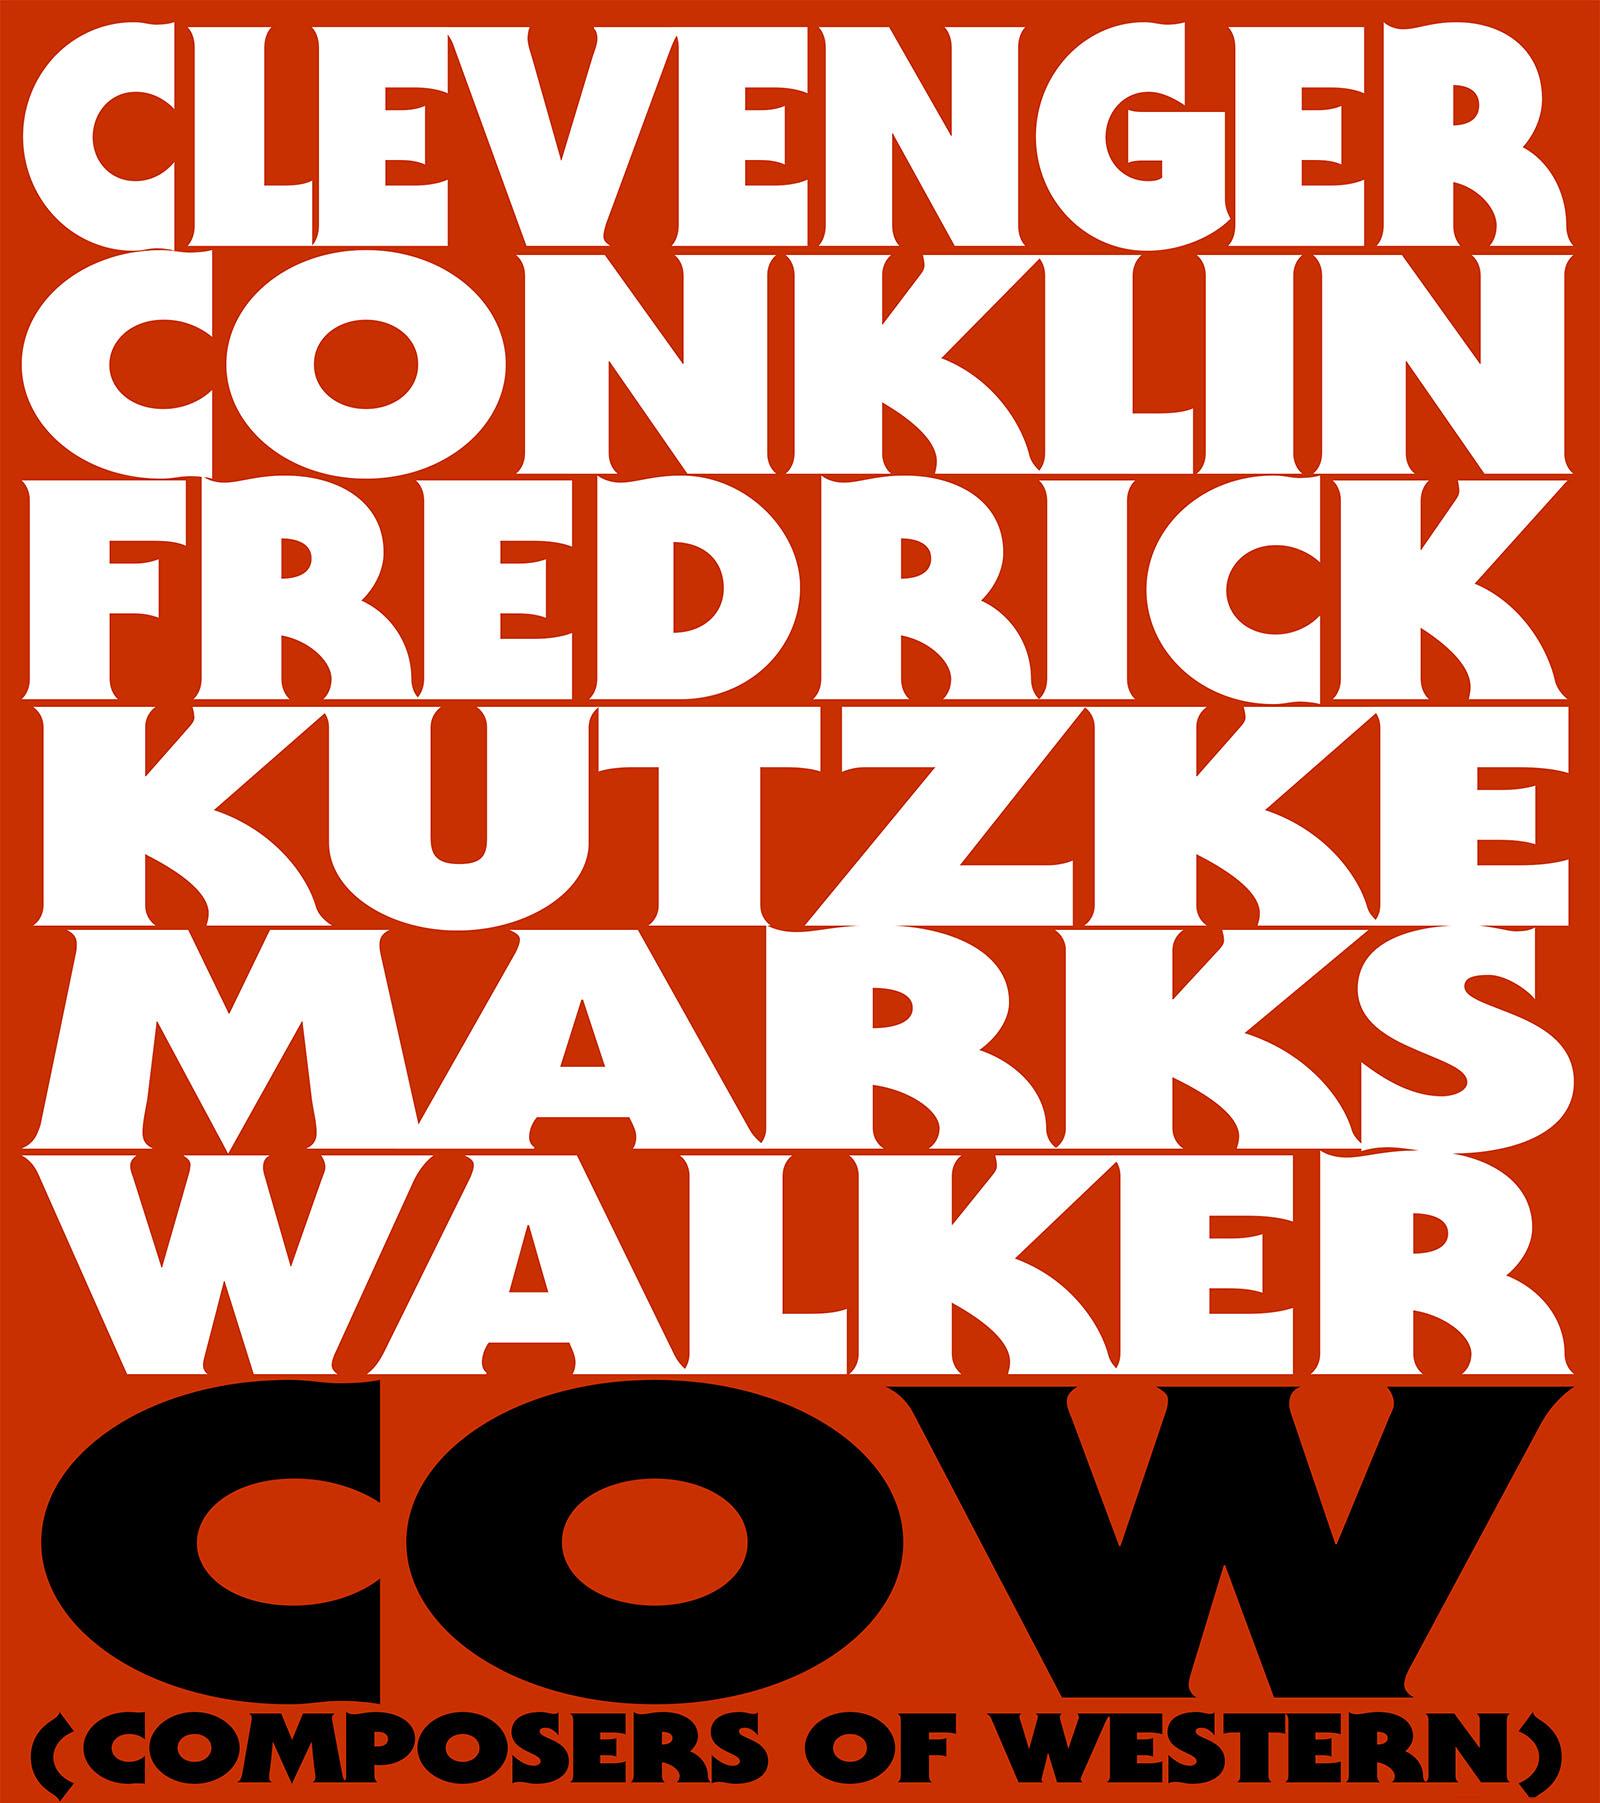 big fat letters with composers names and the letters COW underneath